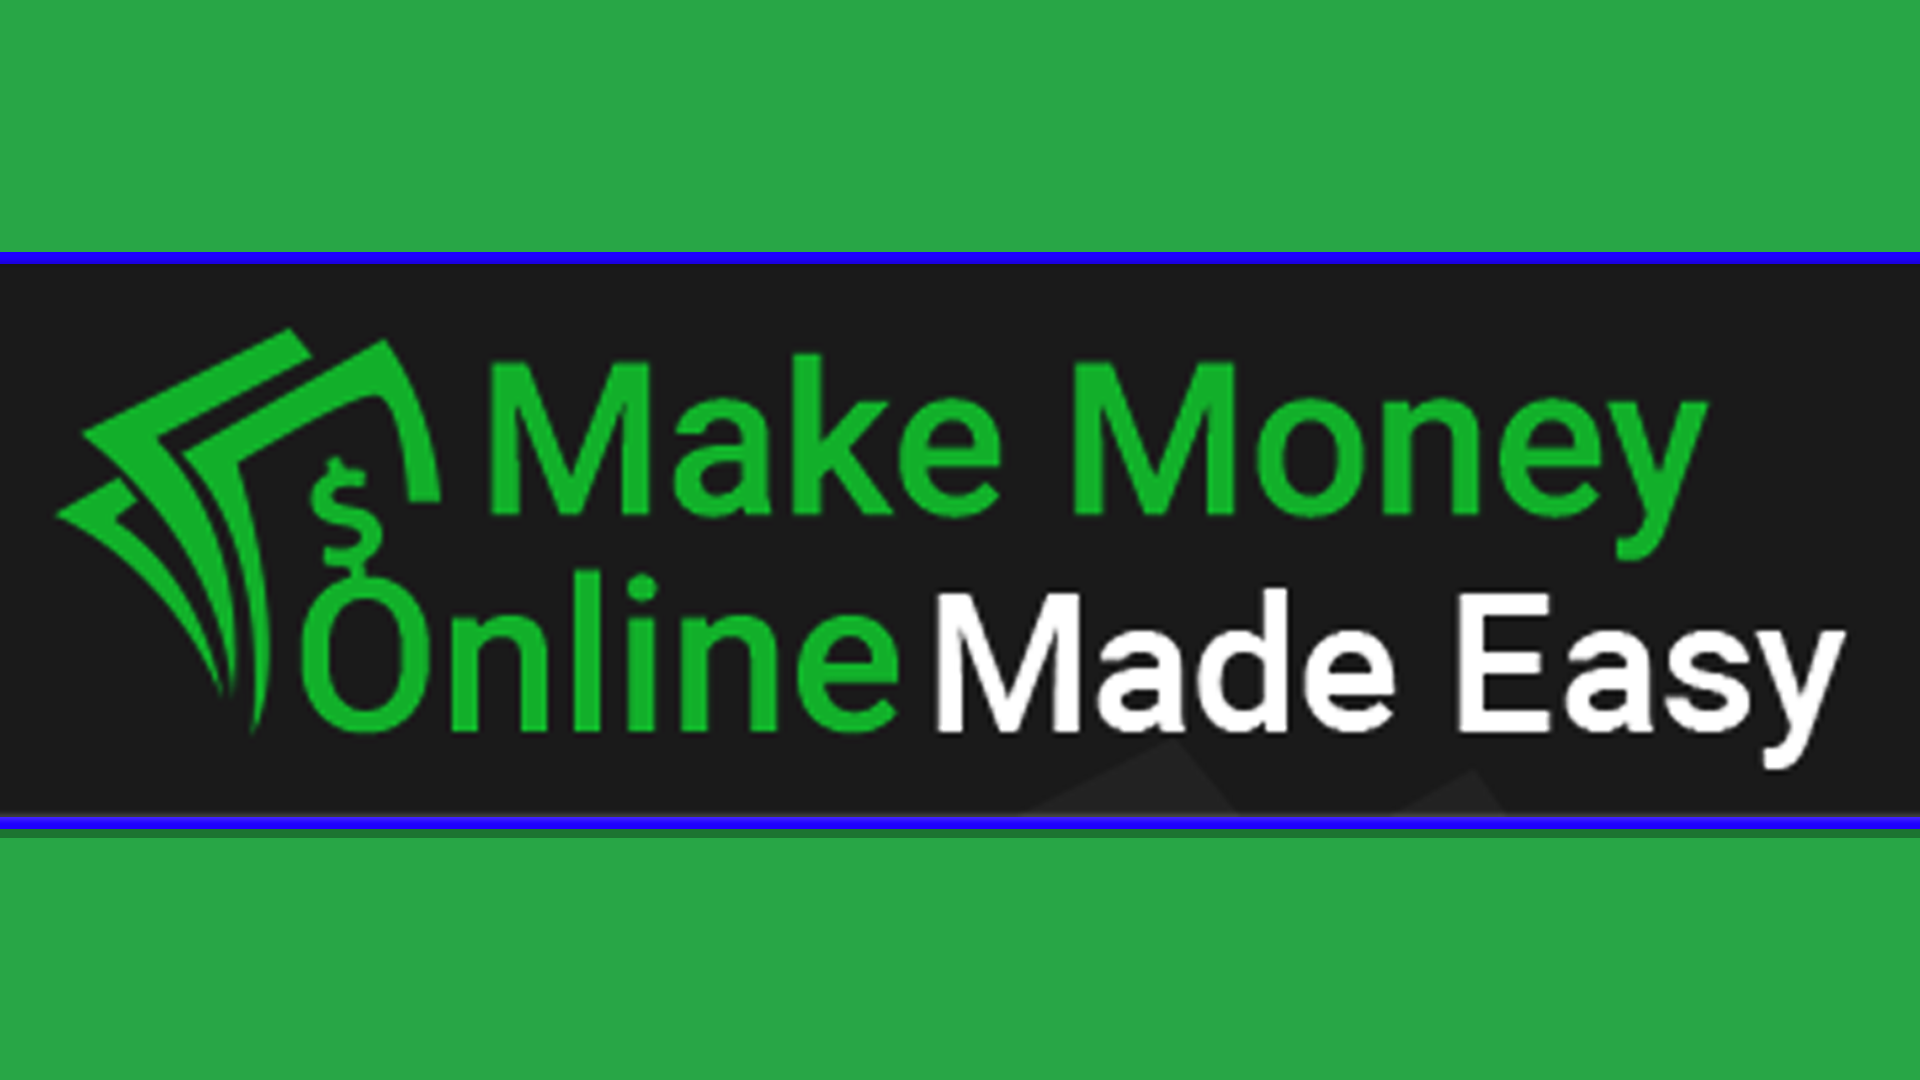 Liz Tomey - Making Money Online Made Easy Course